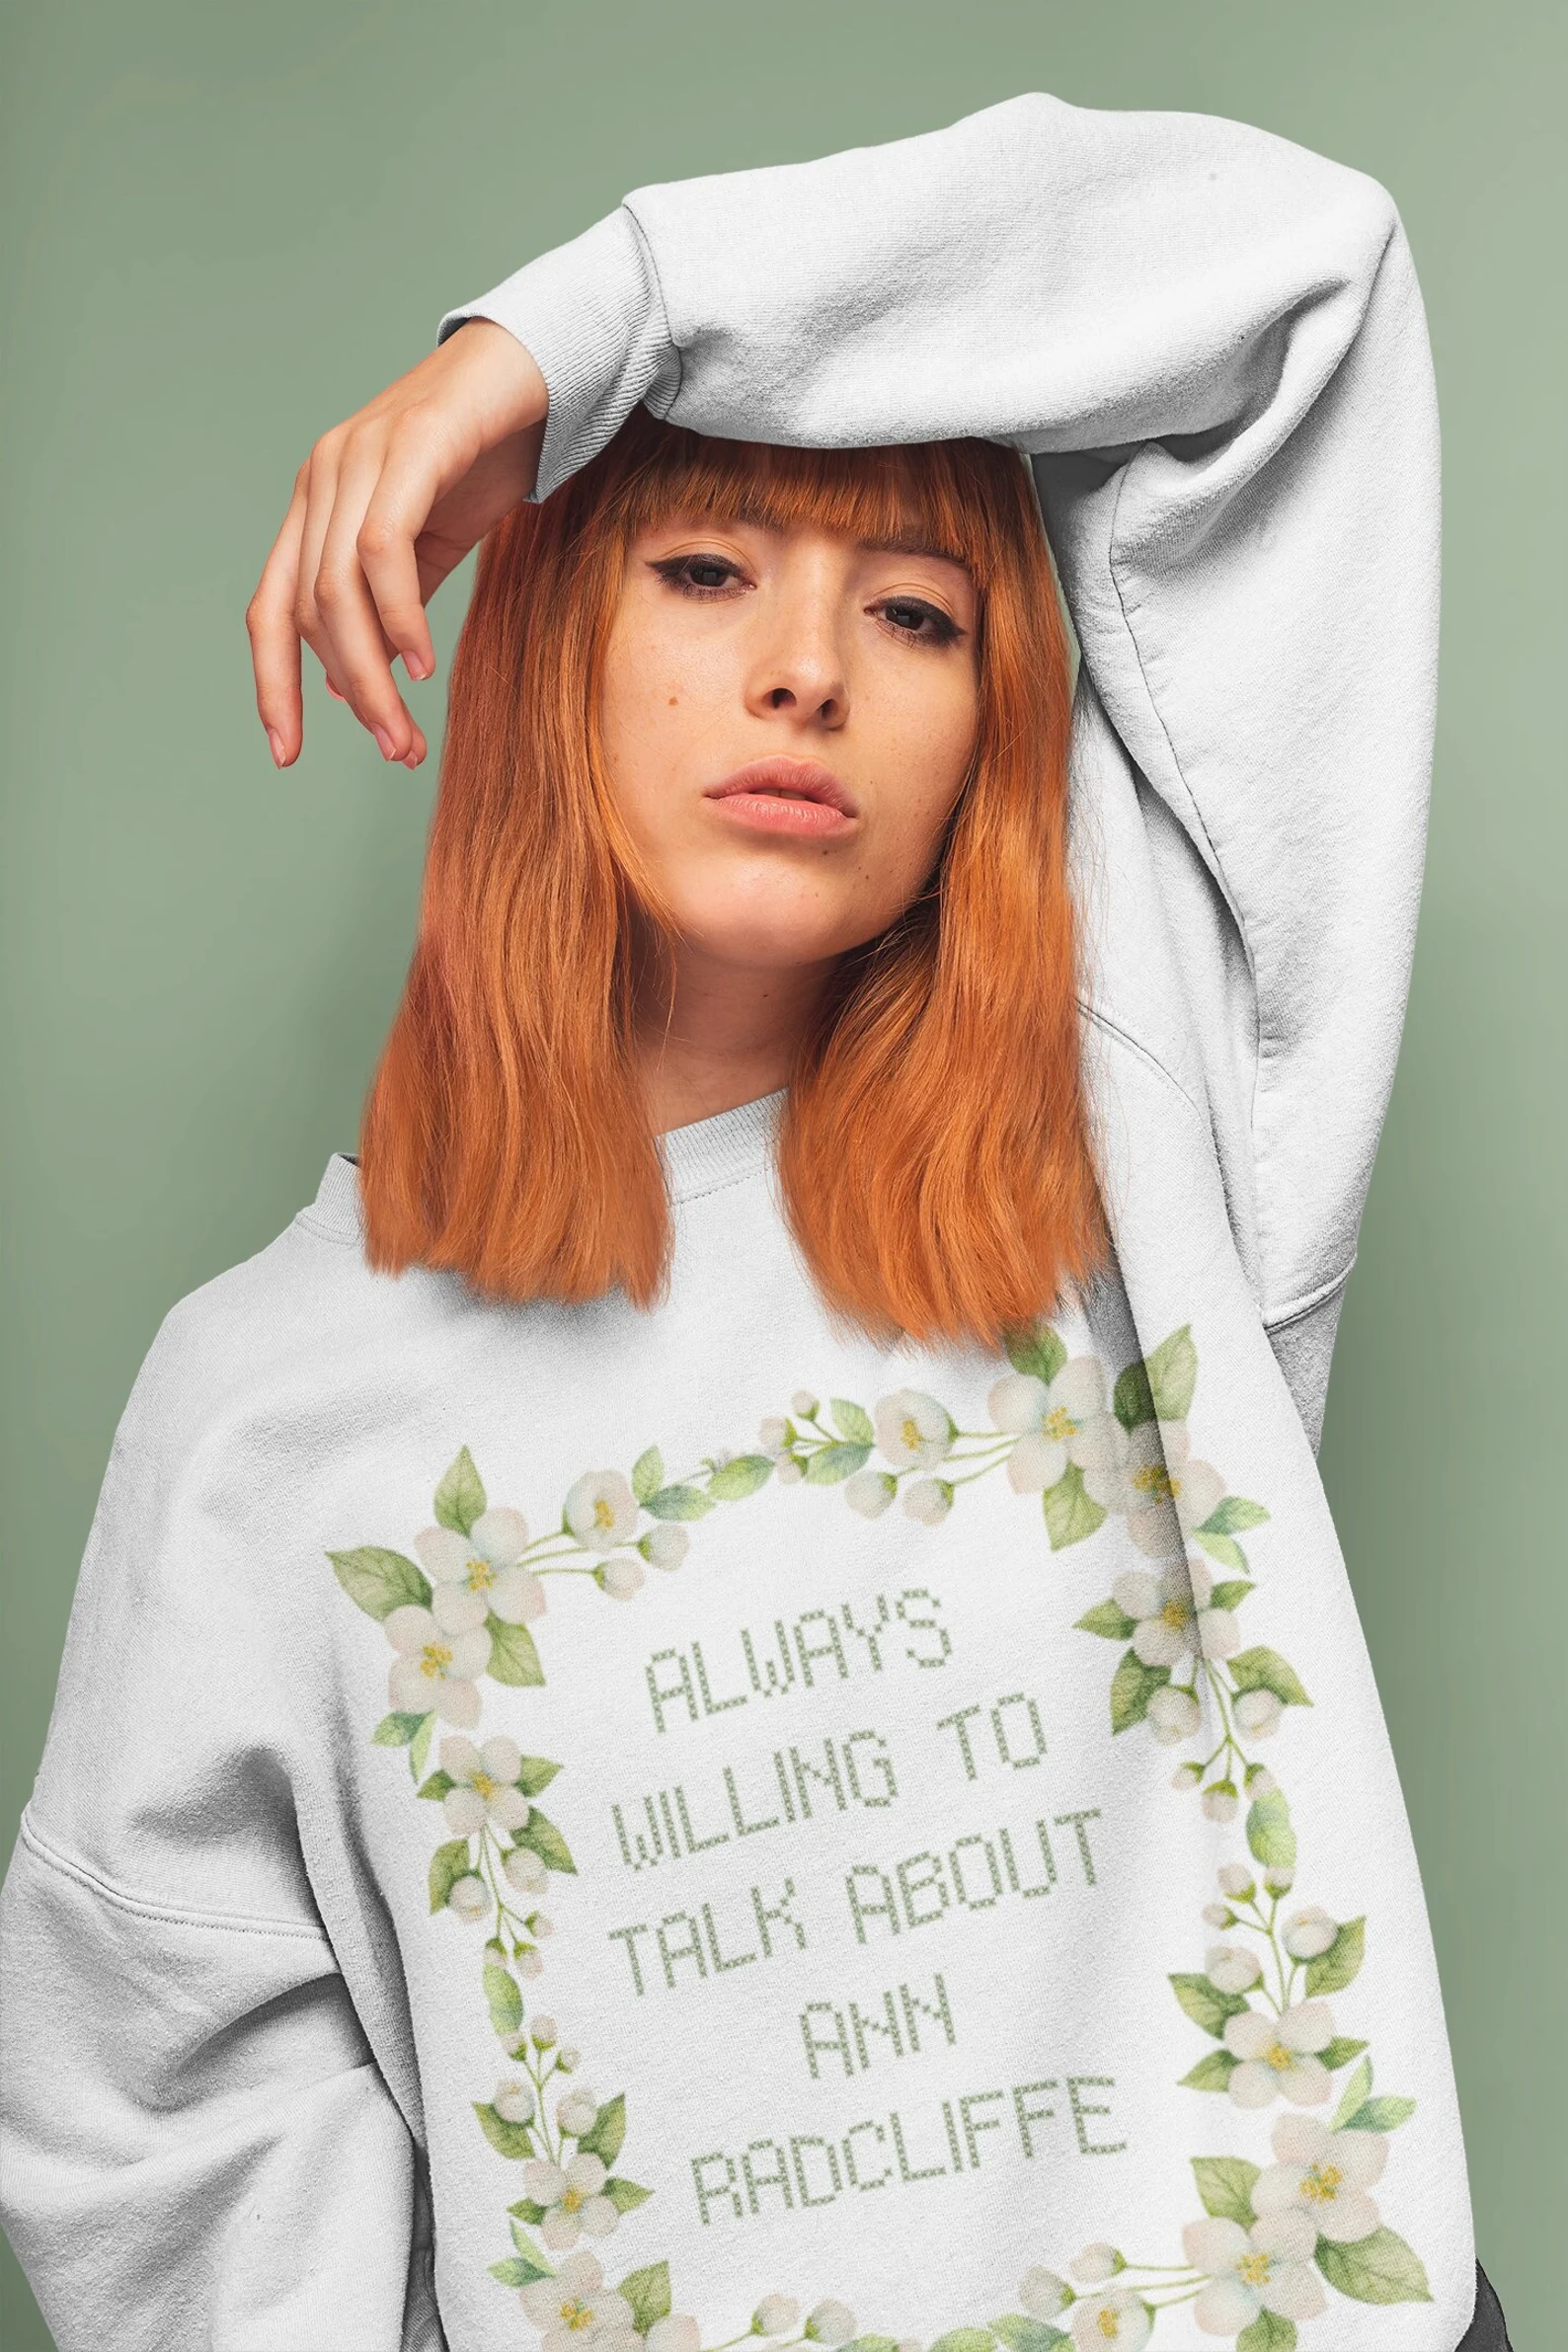 A person wearing a sweatshirt with cross-stitch-looking text reading "Always Willing to Talk About Ann Radcliffe" and a floral border